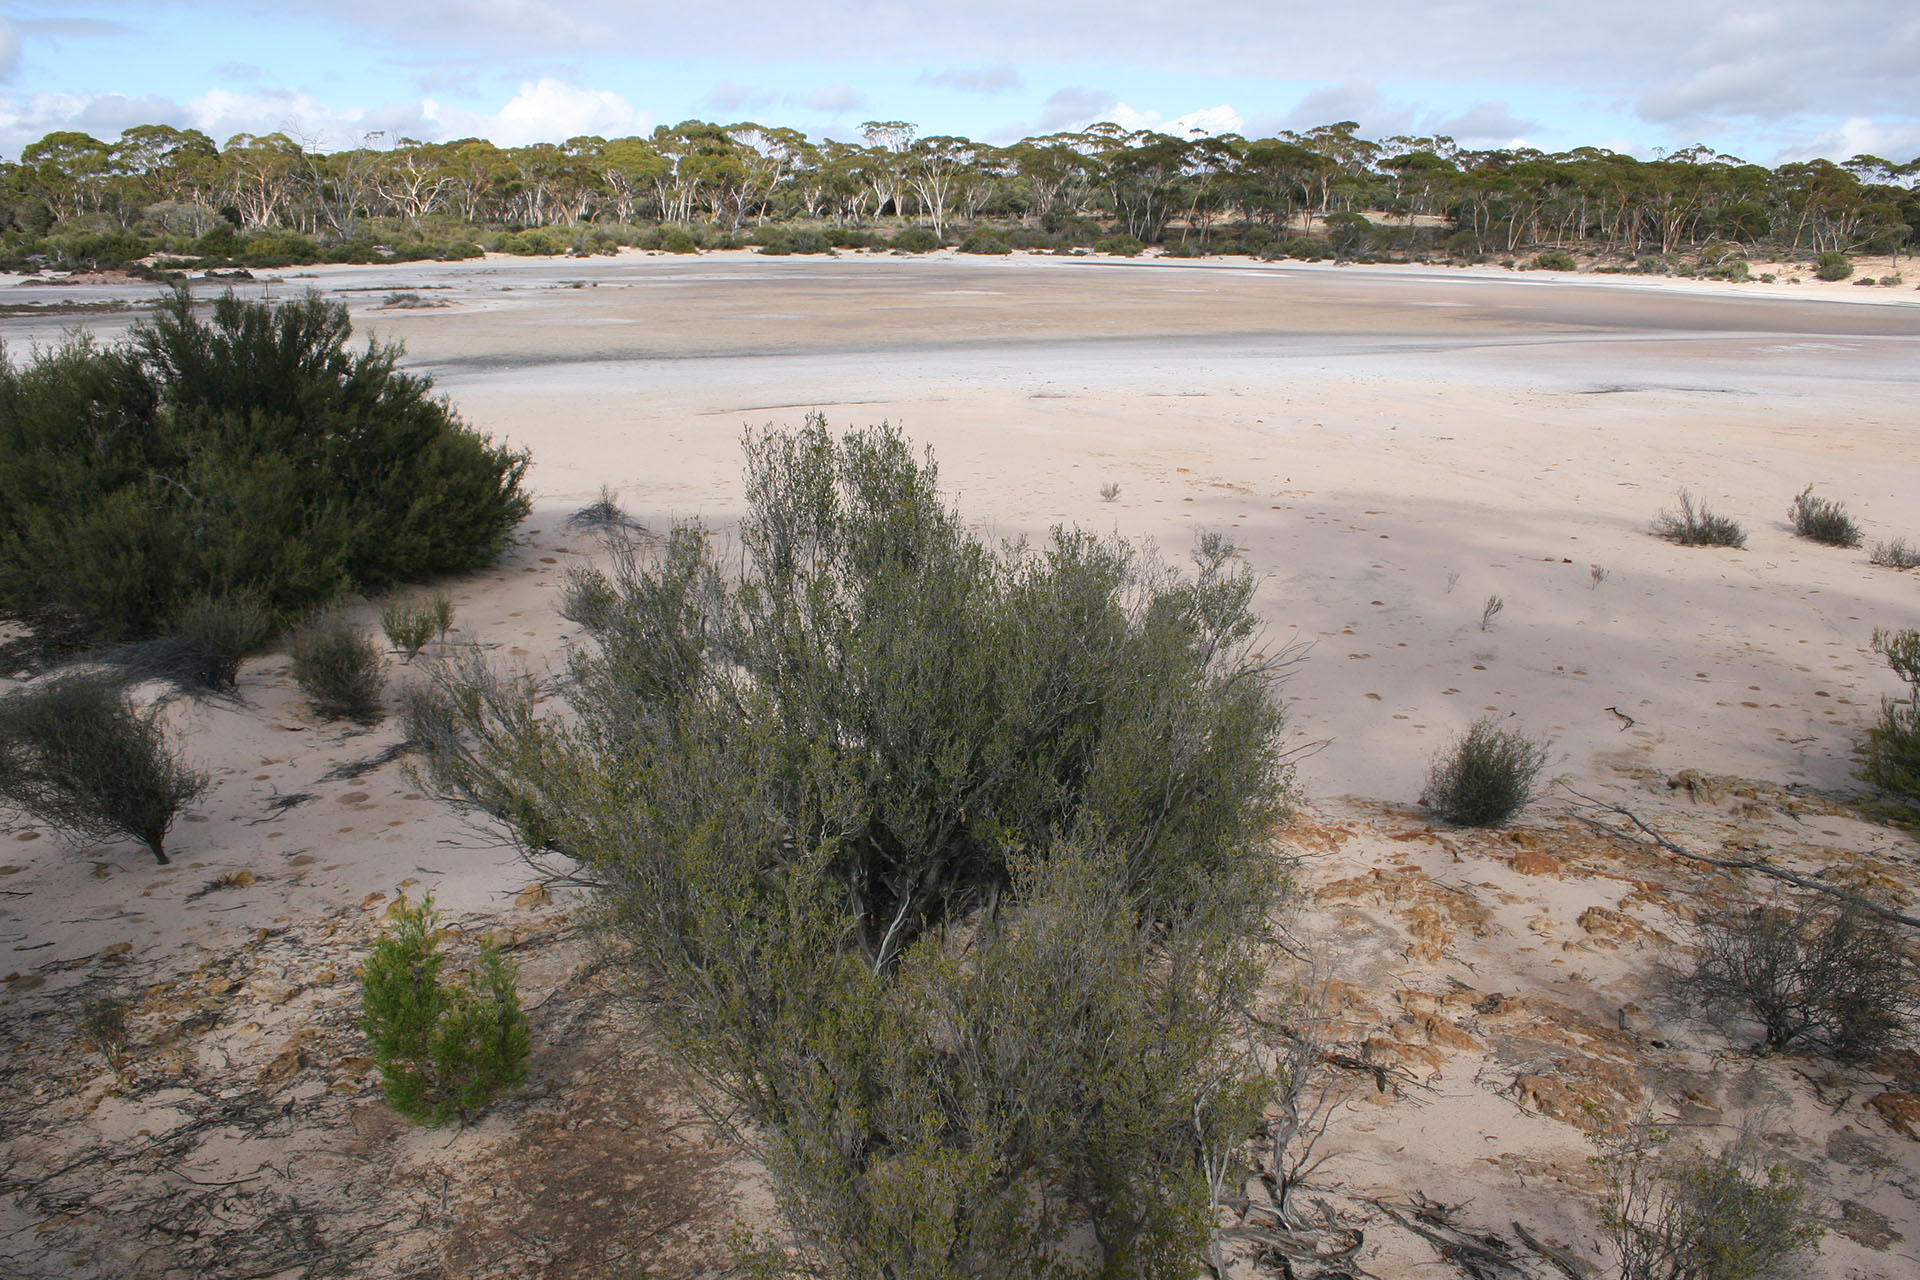 One of the dry lakes.